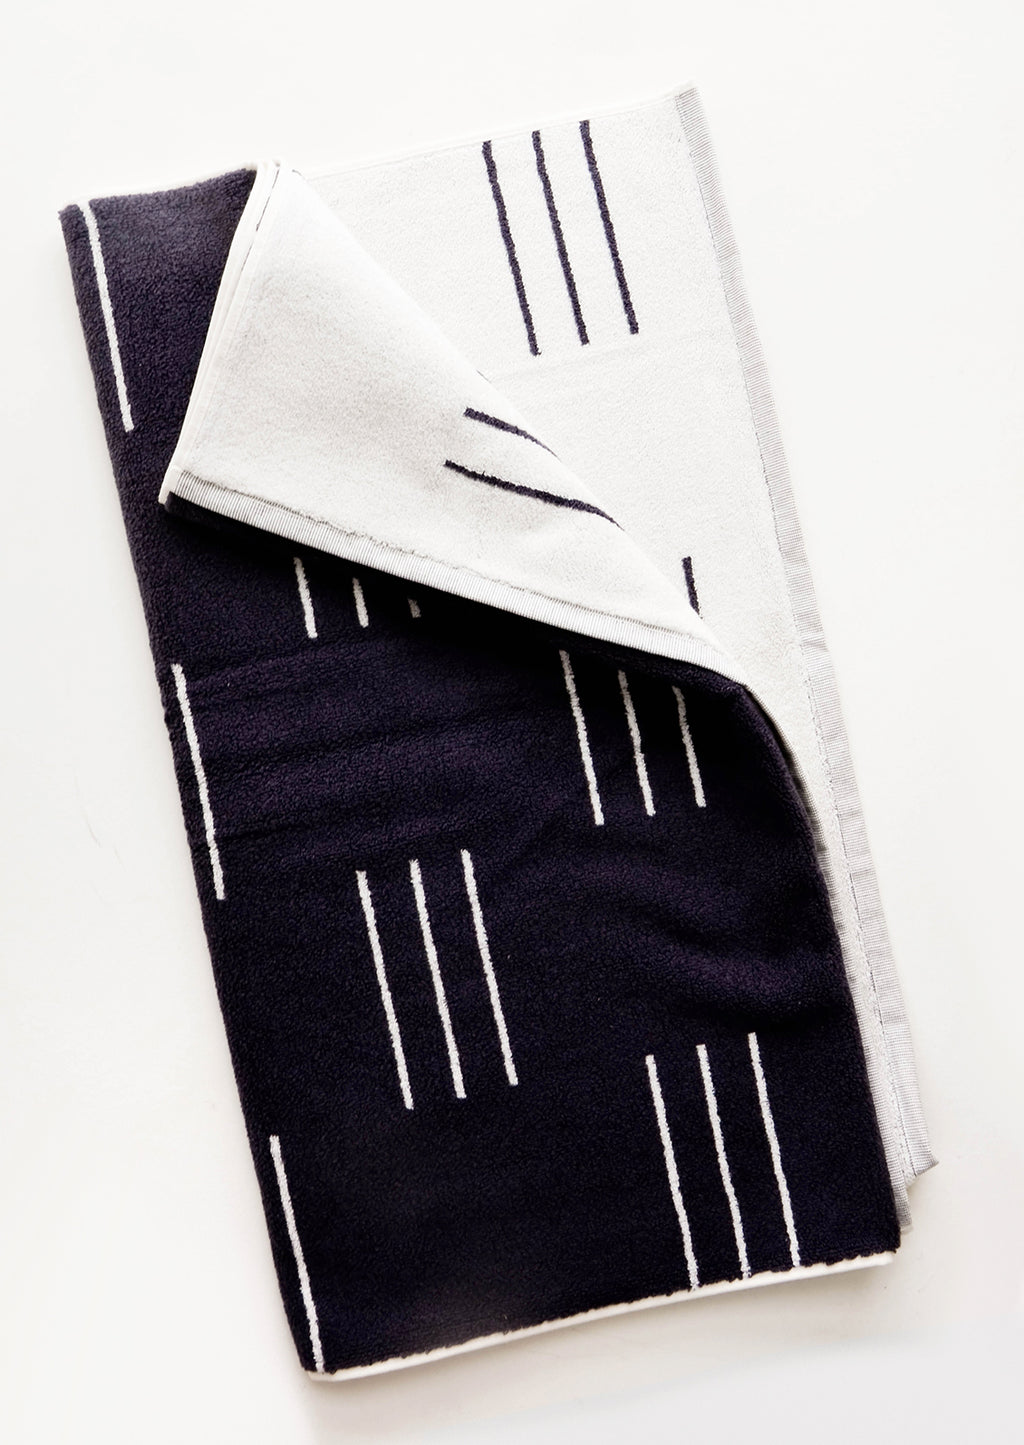 Charcoal Dash / Hand Towel: Terrycloth towel in jacquard design, charcoal with white line print